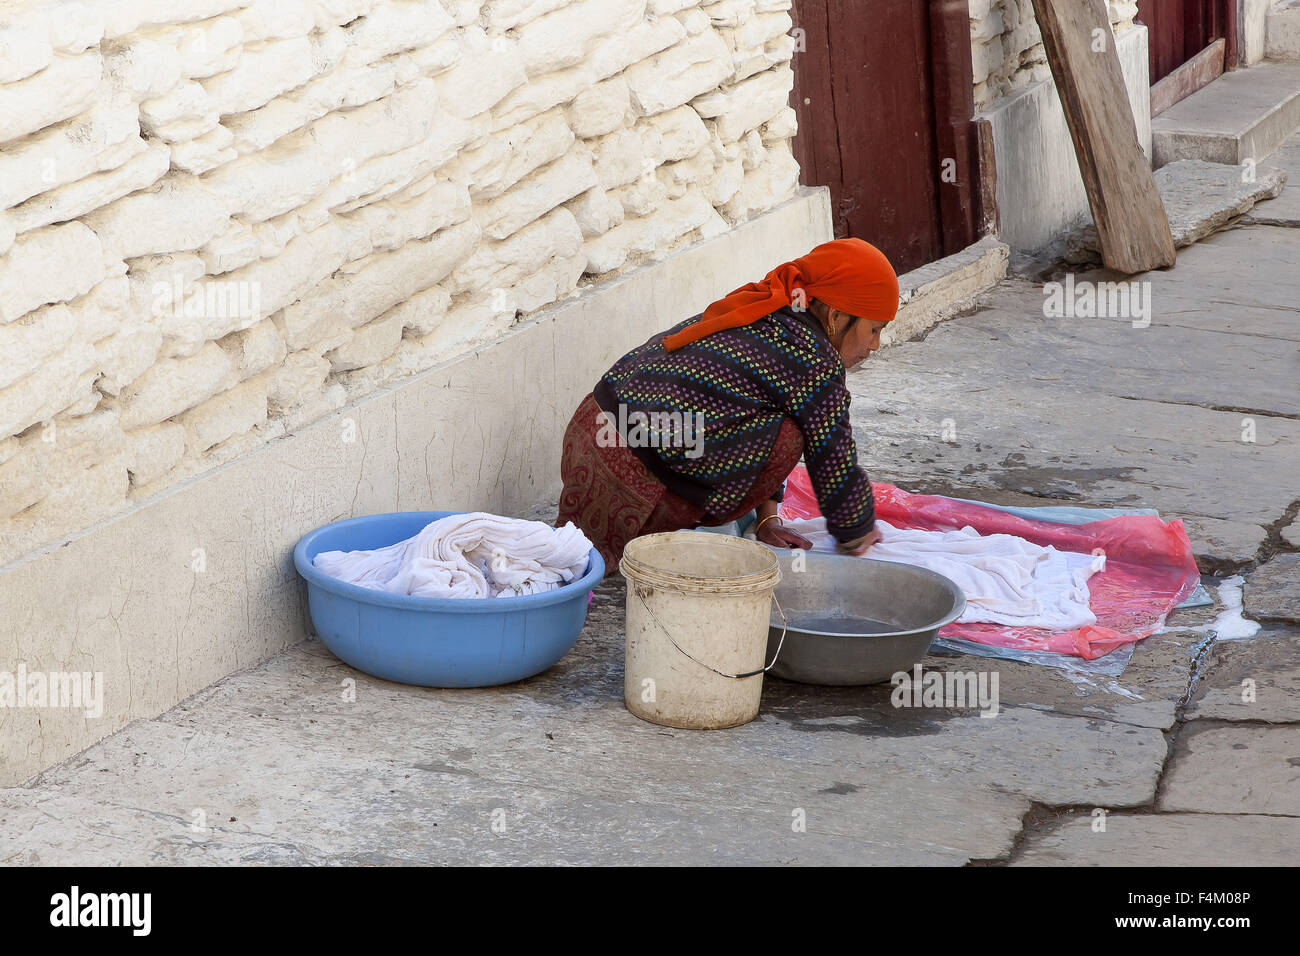 Peasant woman washes clothes in the street of Marpa village, Mustang, Nepal. Stock Photo